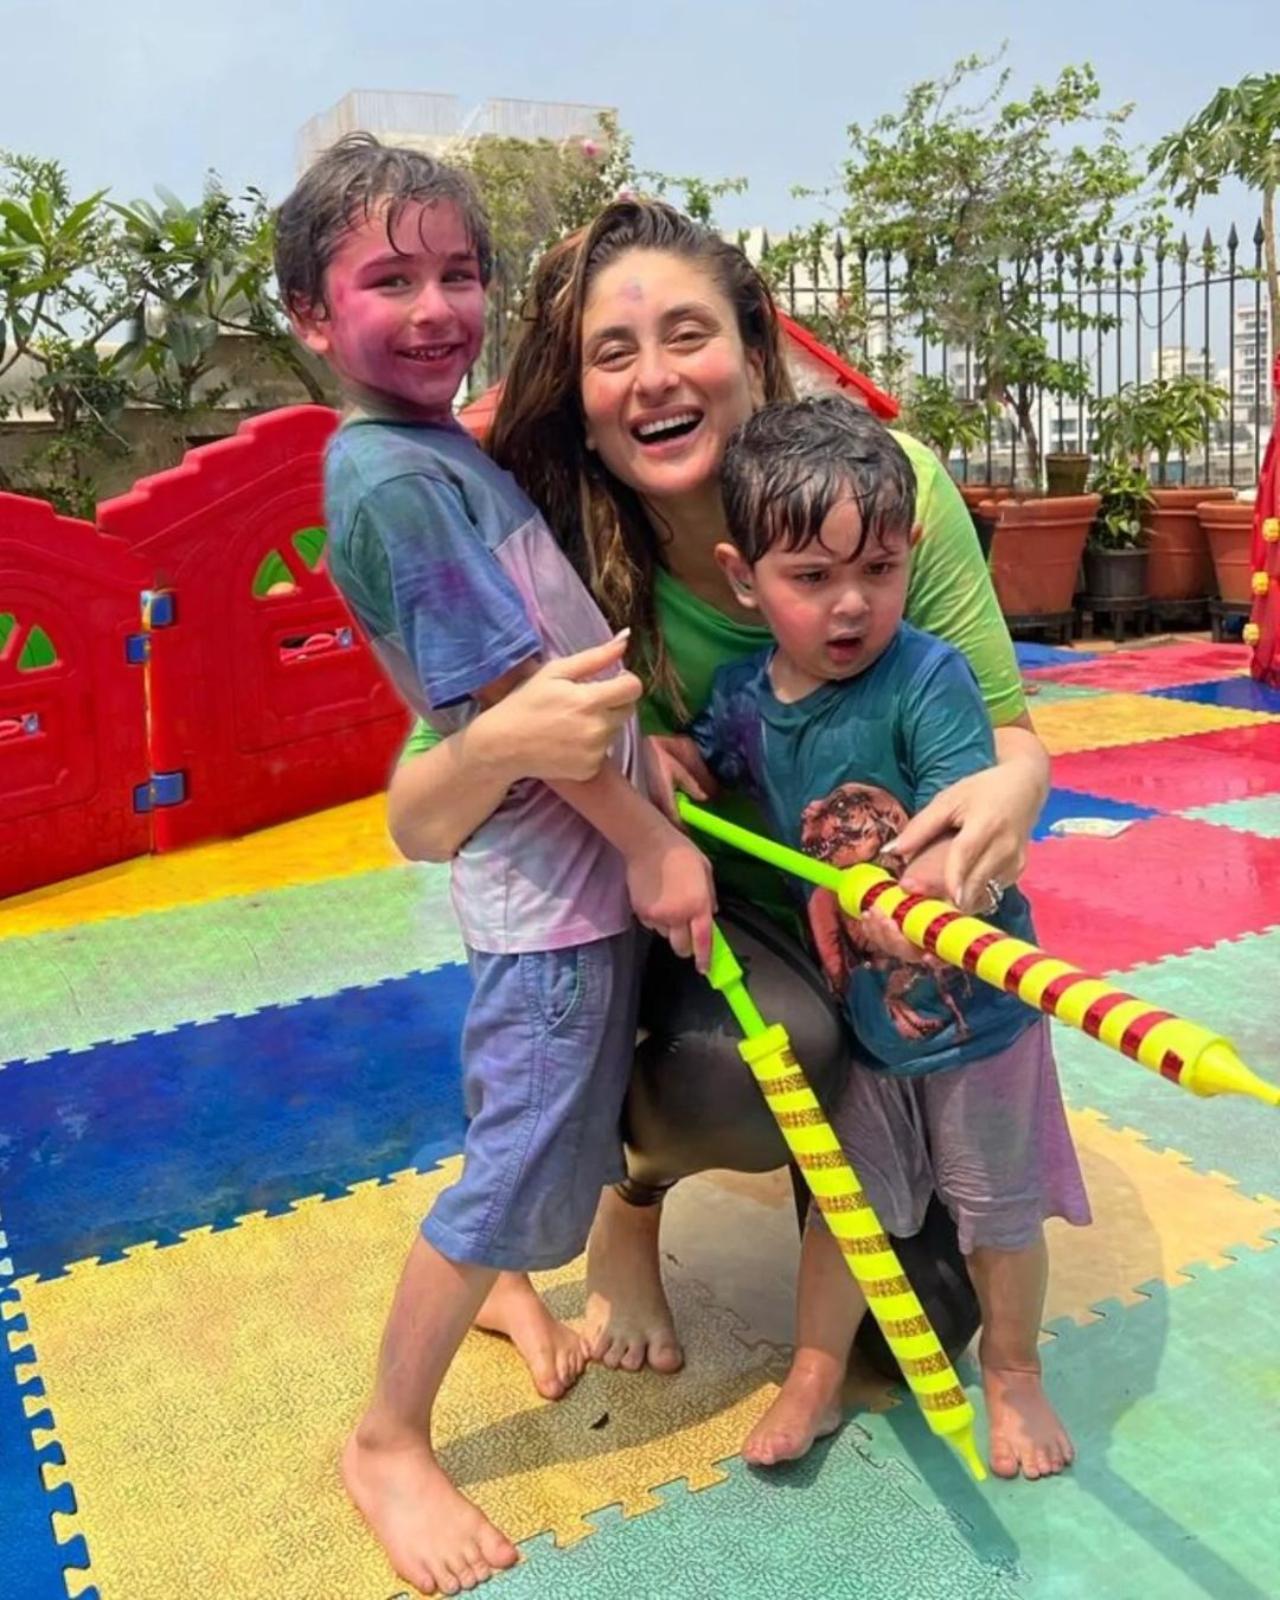 Kareena Kapoor celebrated the day with her munchkins- Taimur and Jeh at their Mumbai home. Friends of the little ones were also at the rooftop Holi party. 